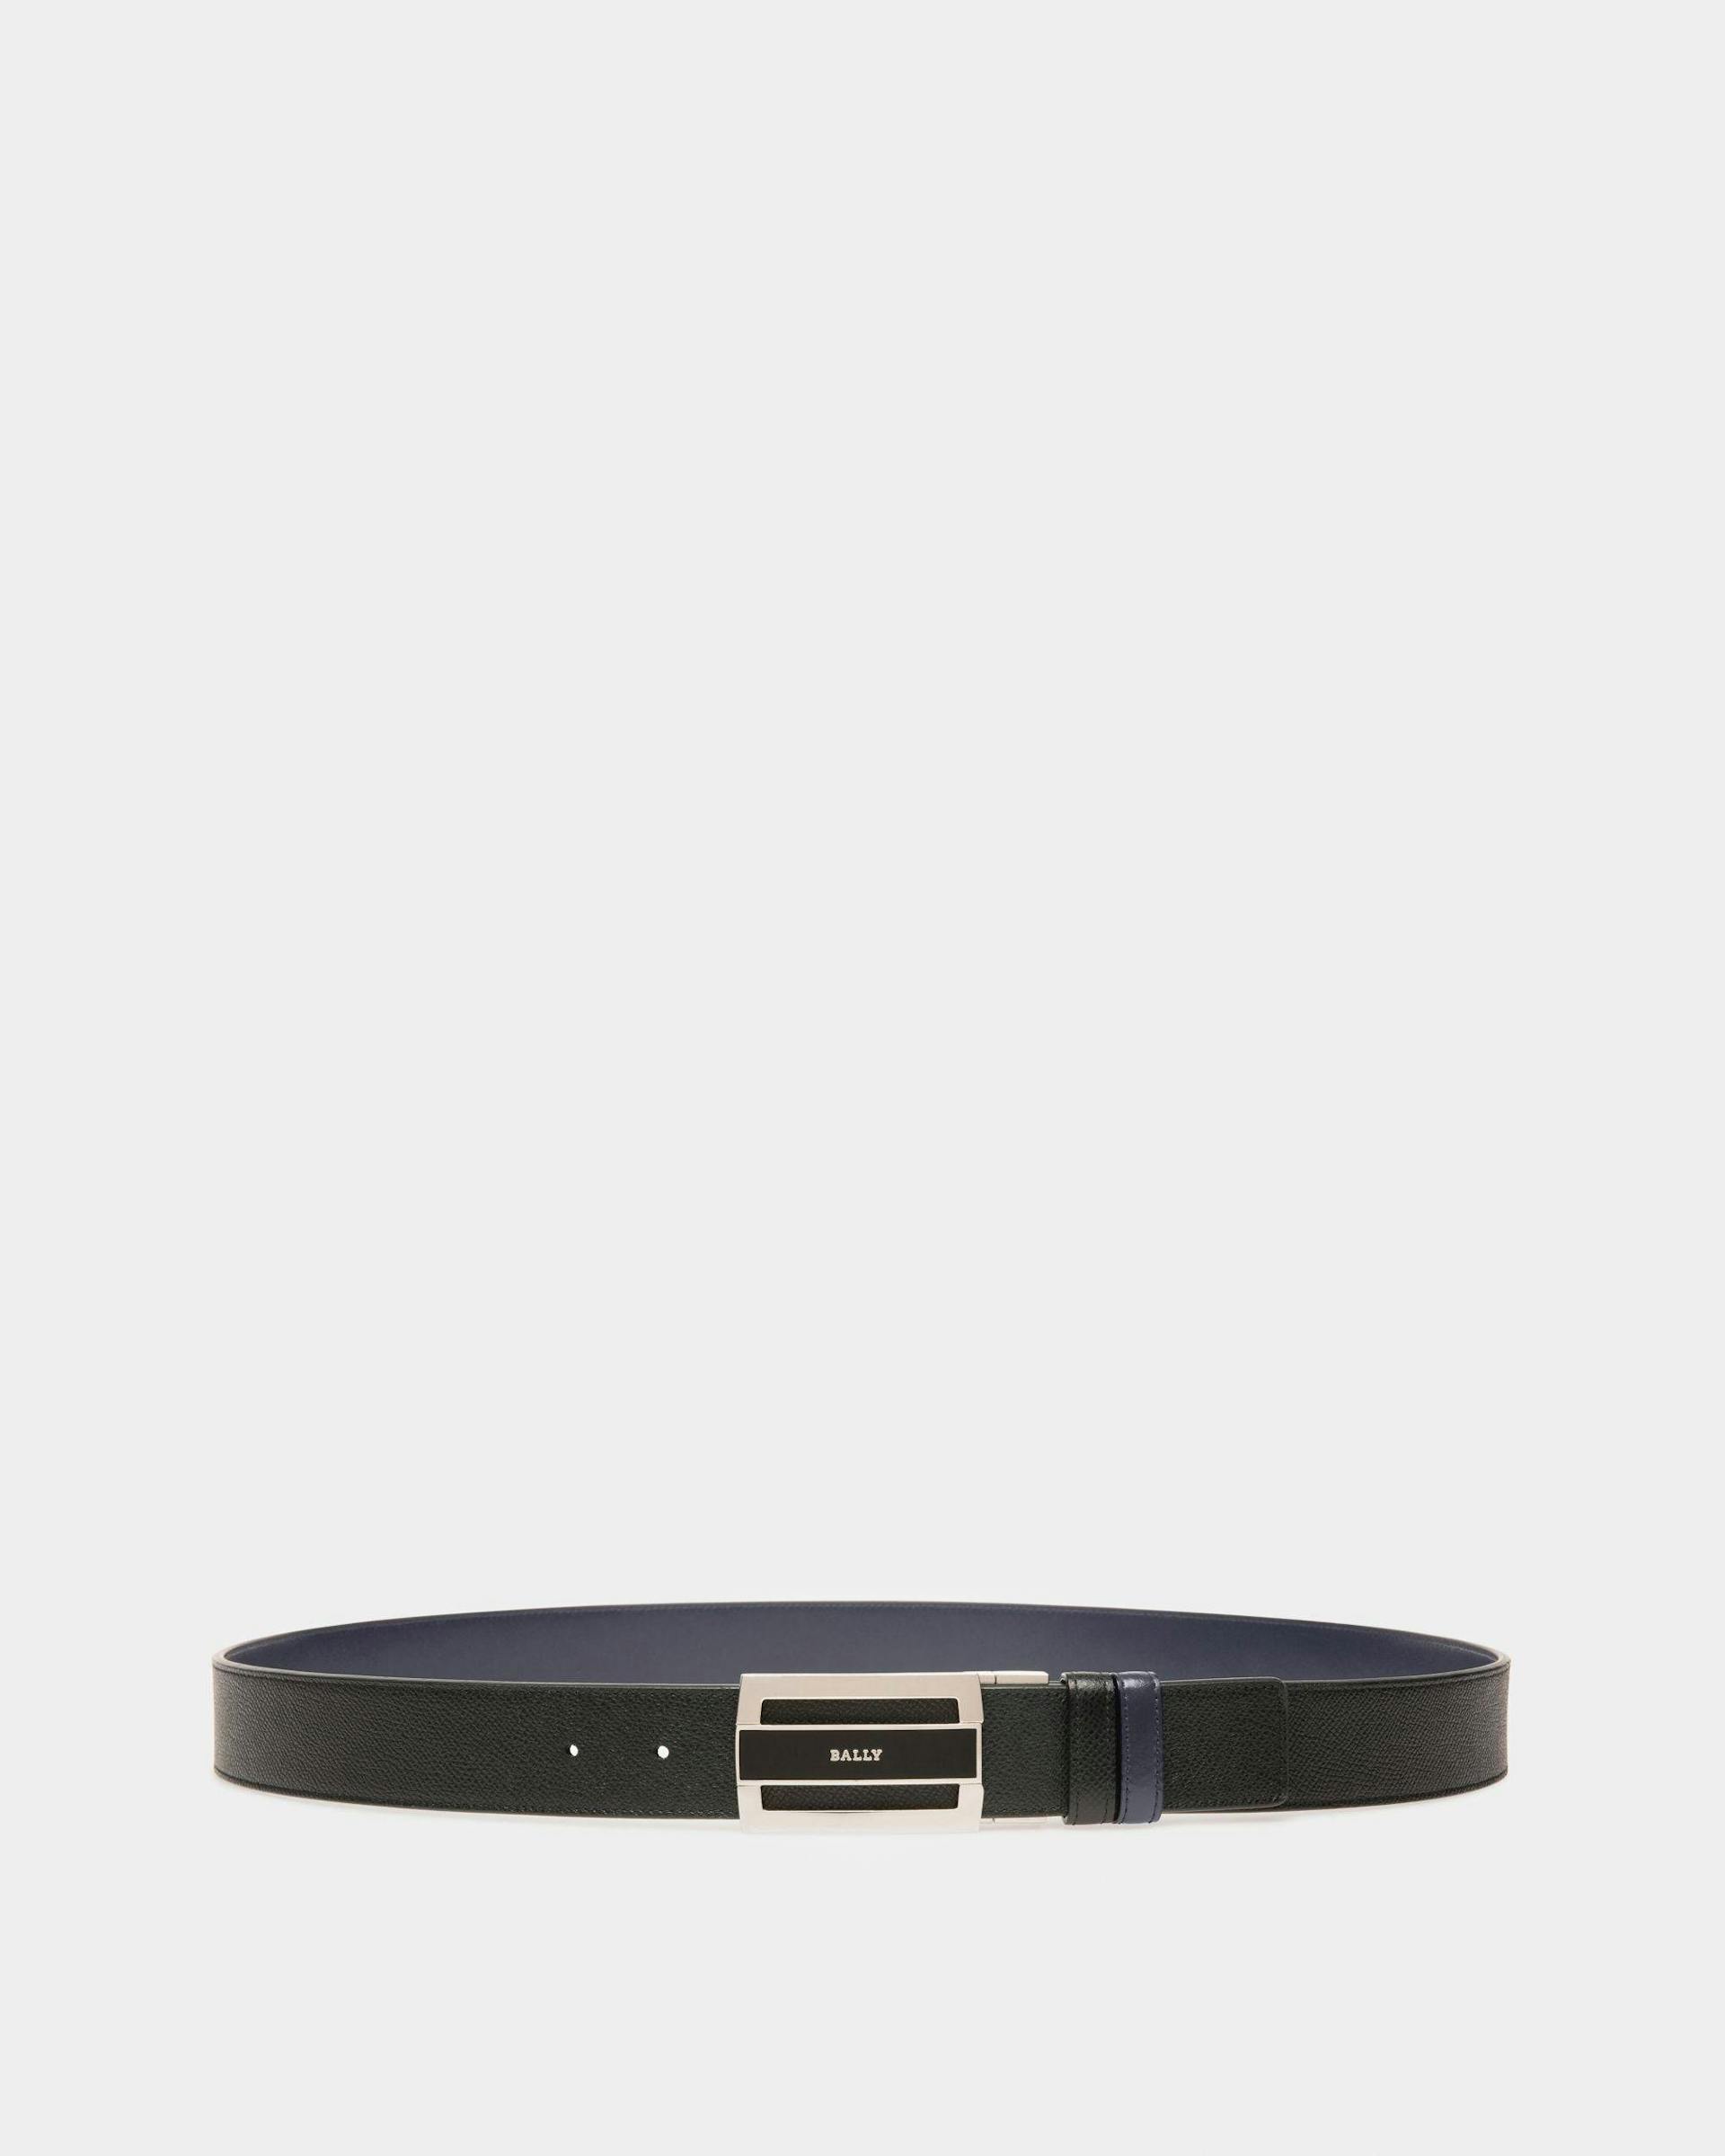 Fabazia Leather 35mm Belt In Black & Navy - Homme - Bally - 01